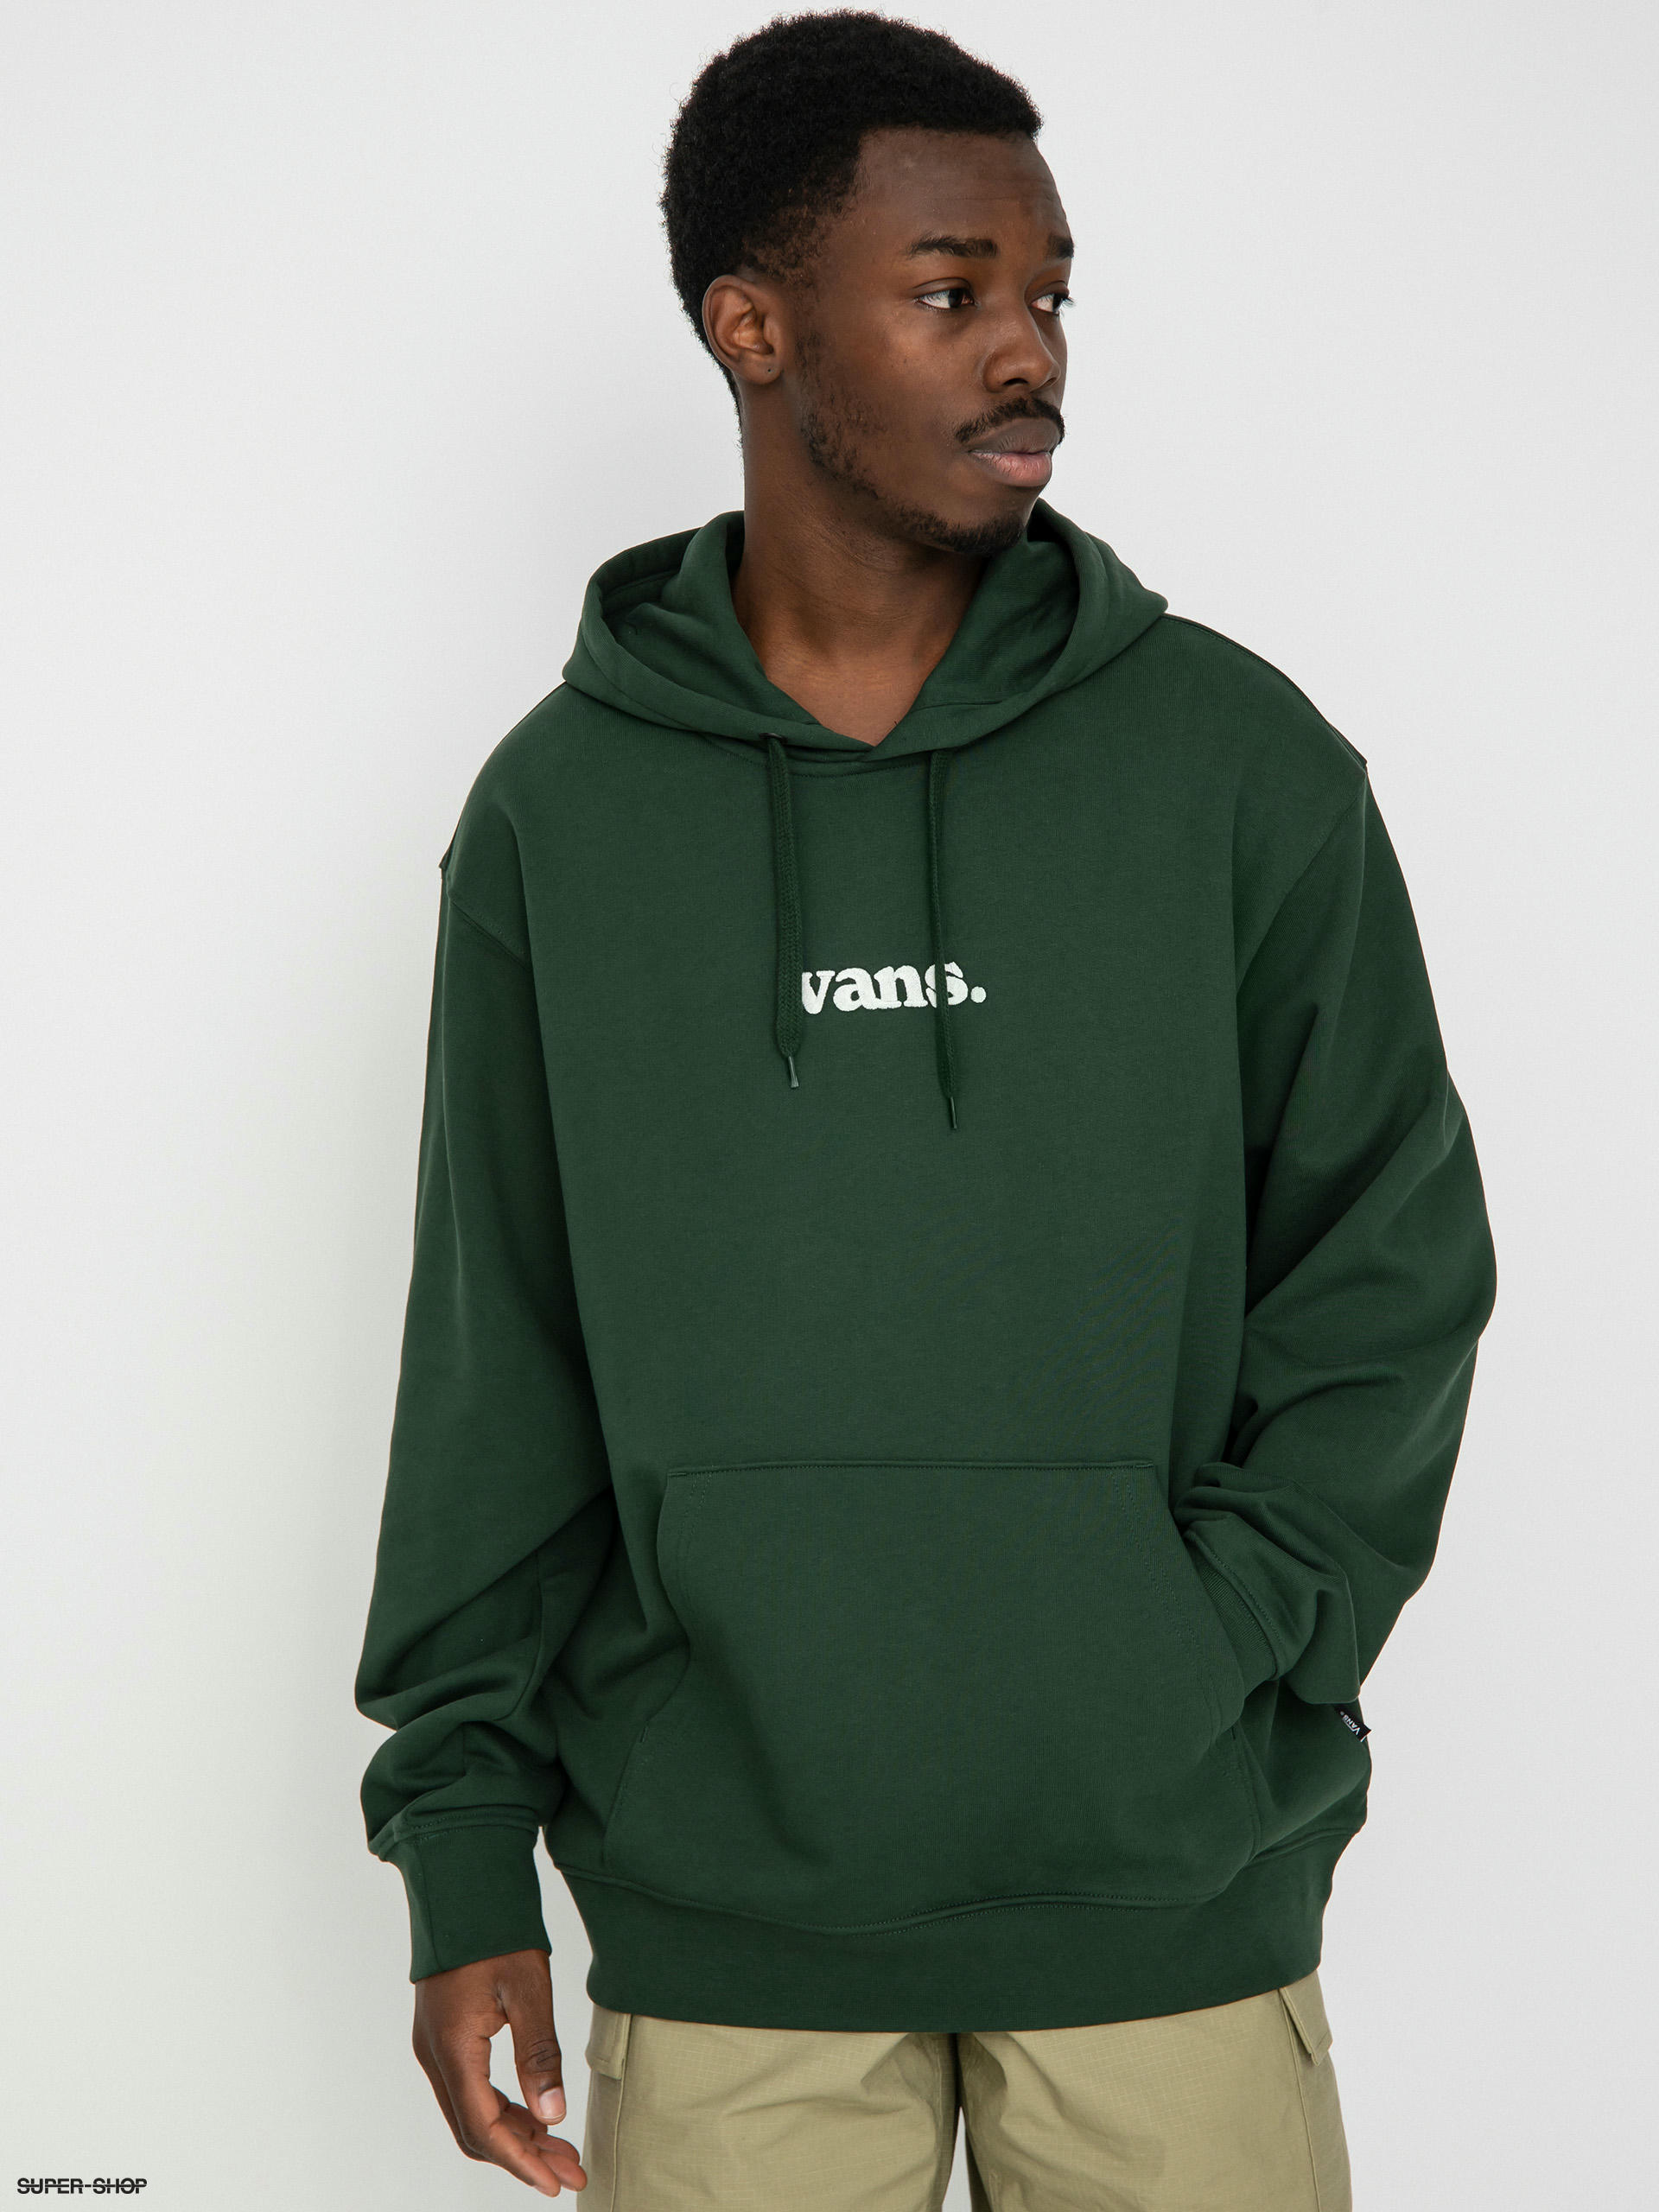 zout barrière Hervat Vans Lowered HD Hoodie (mountain view)